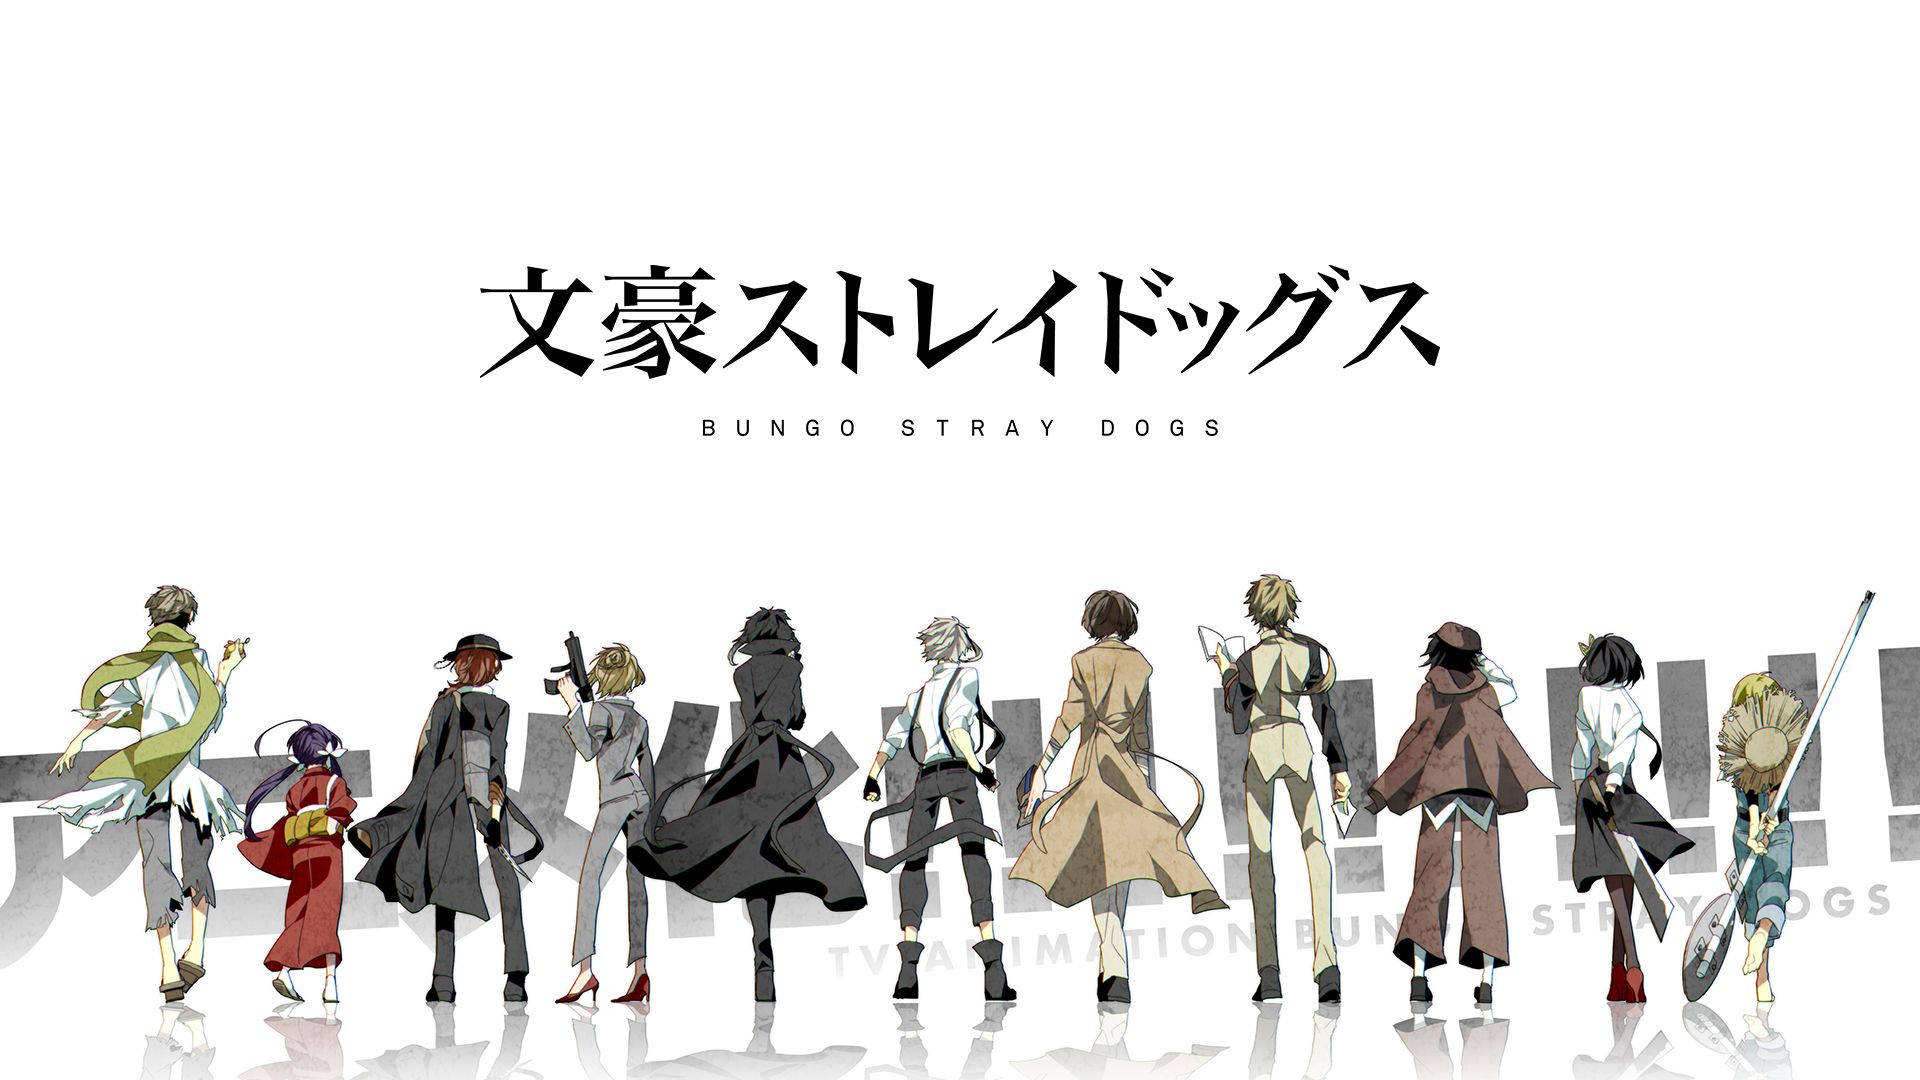 Bungo Stray Dogs Characters Back View